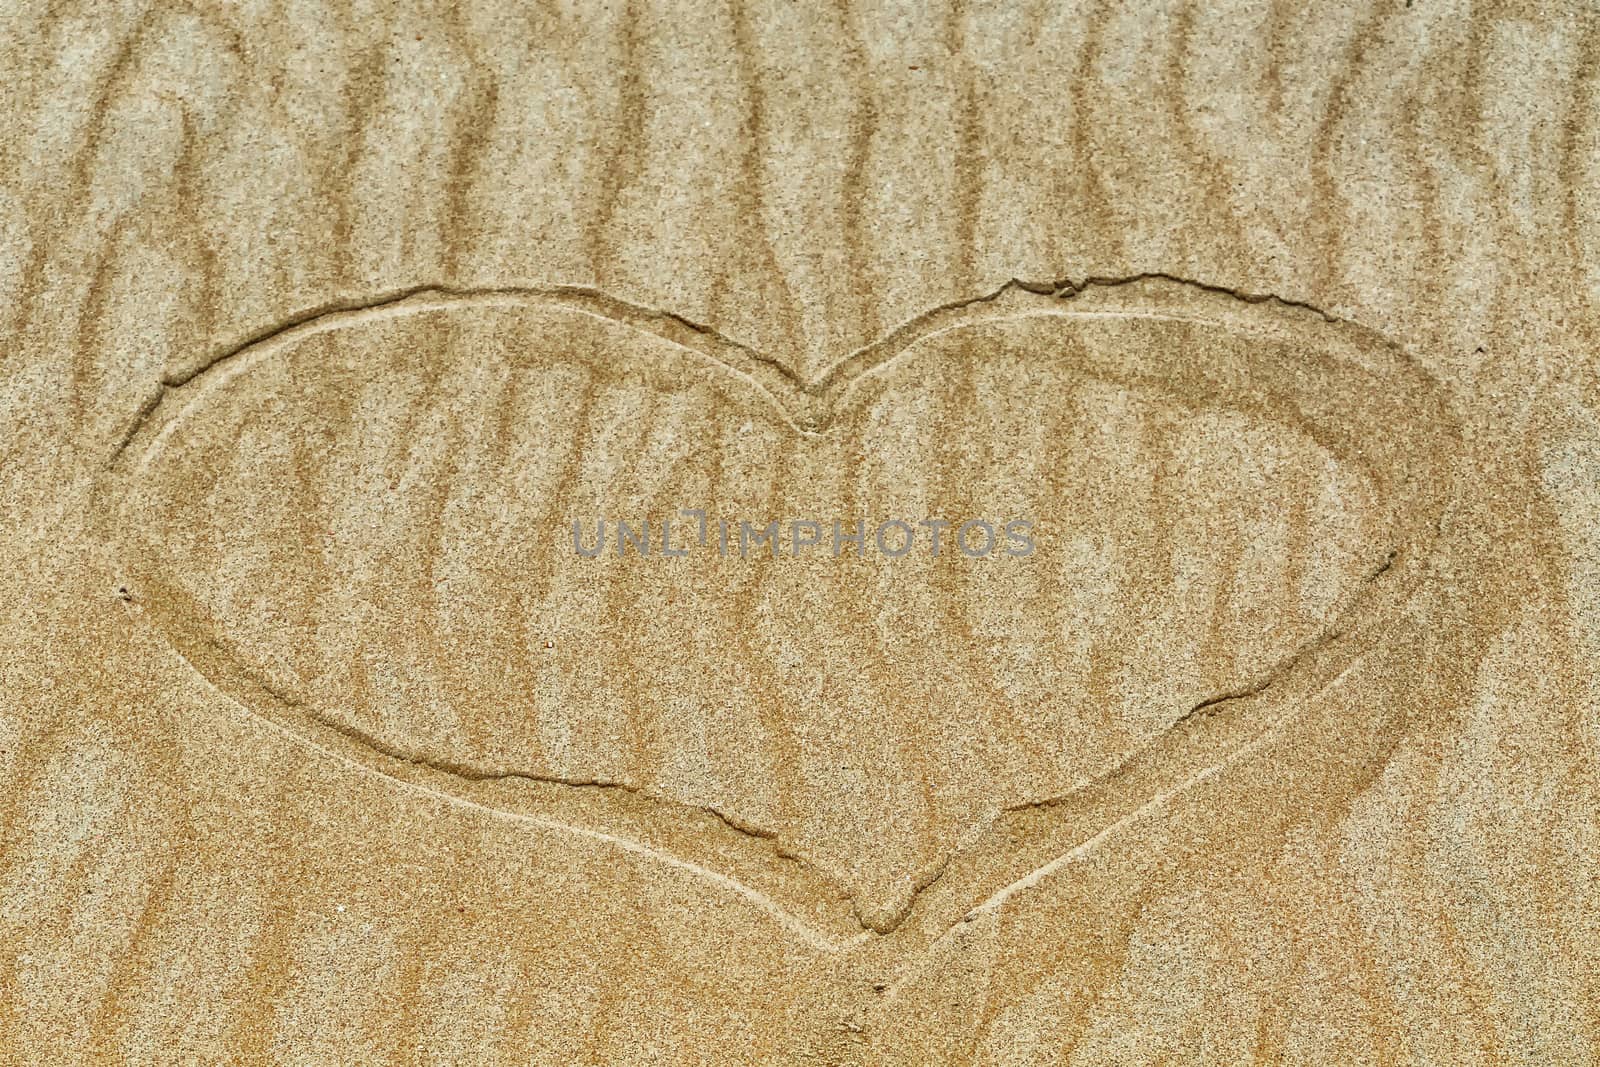 Golden sand with a subscribed in the sand heart.